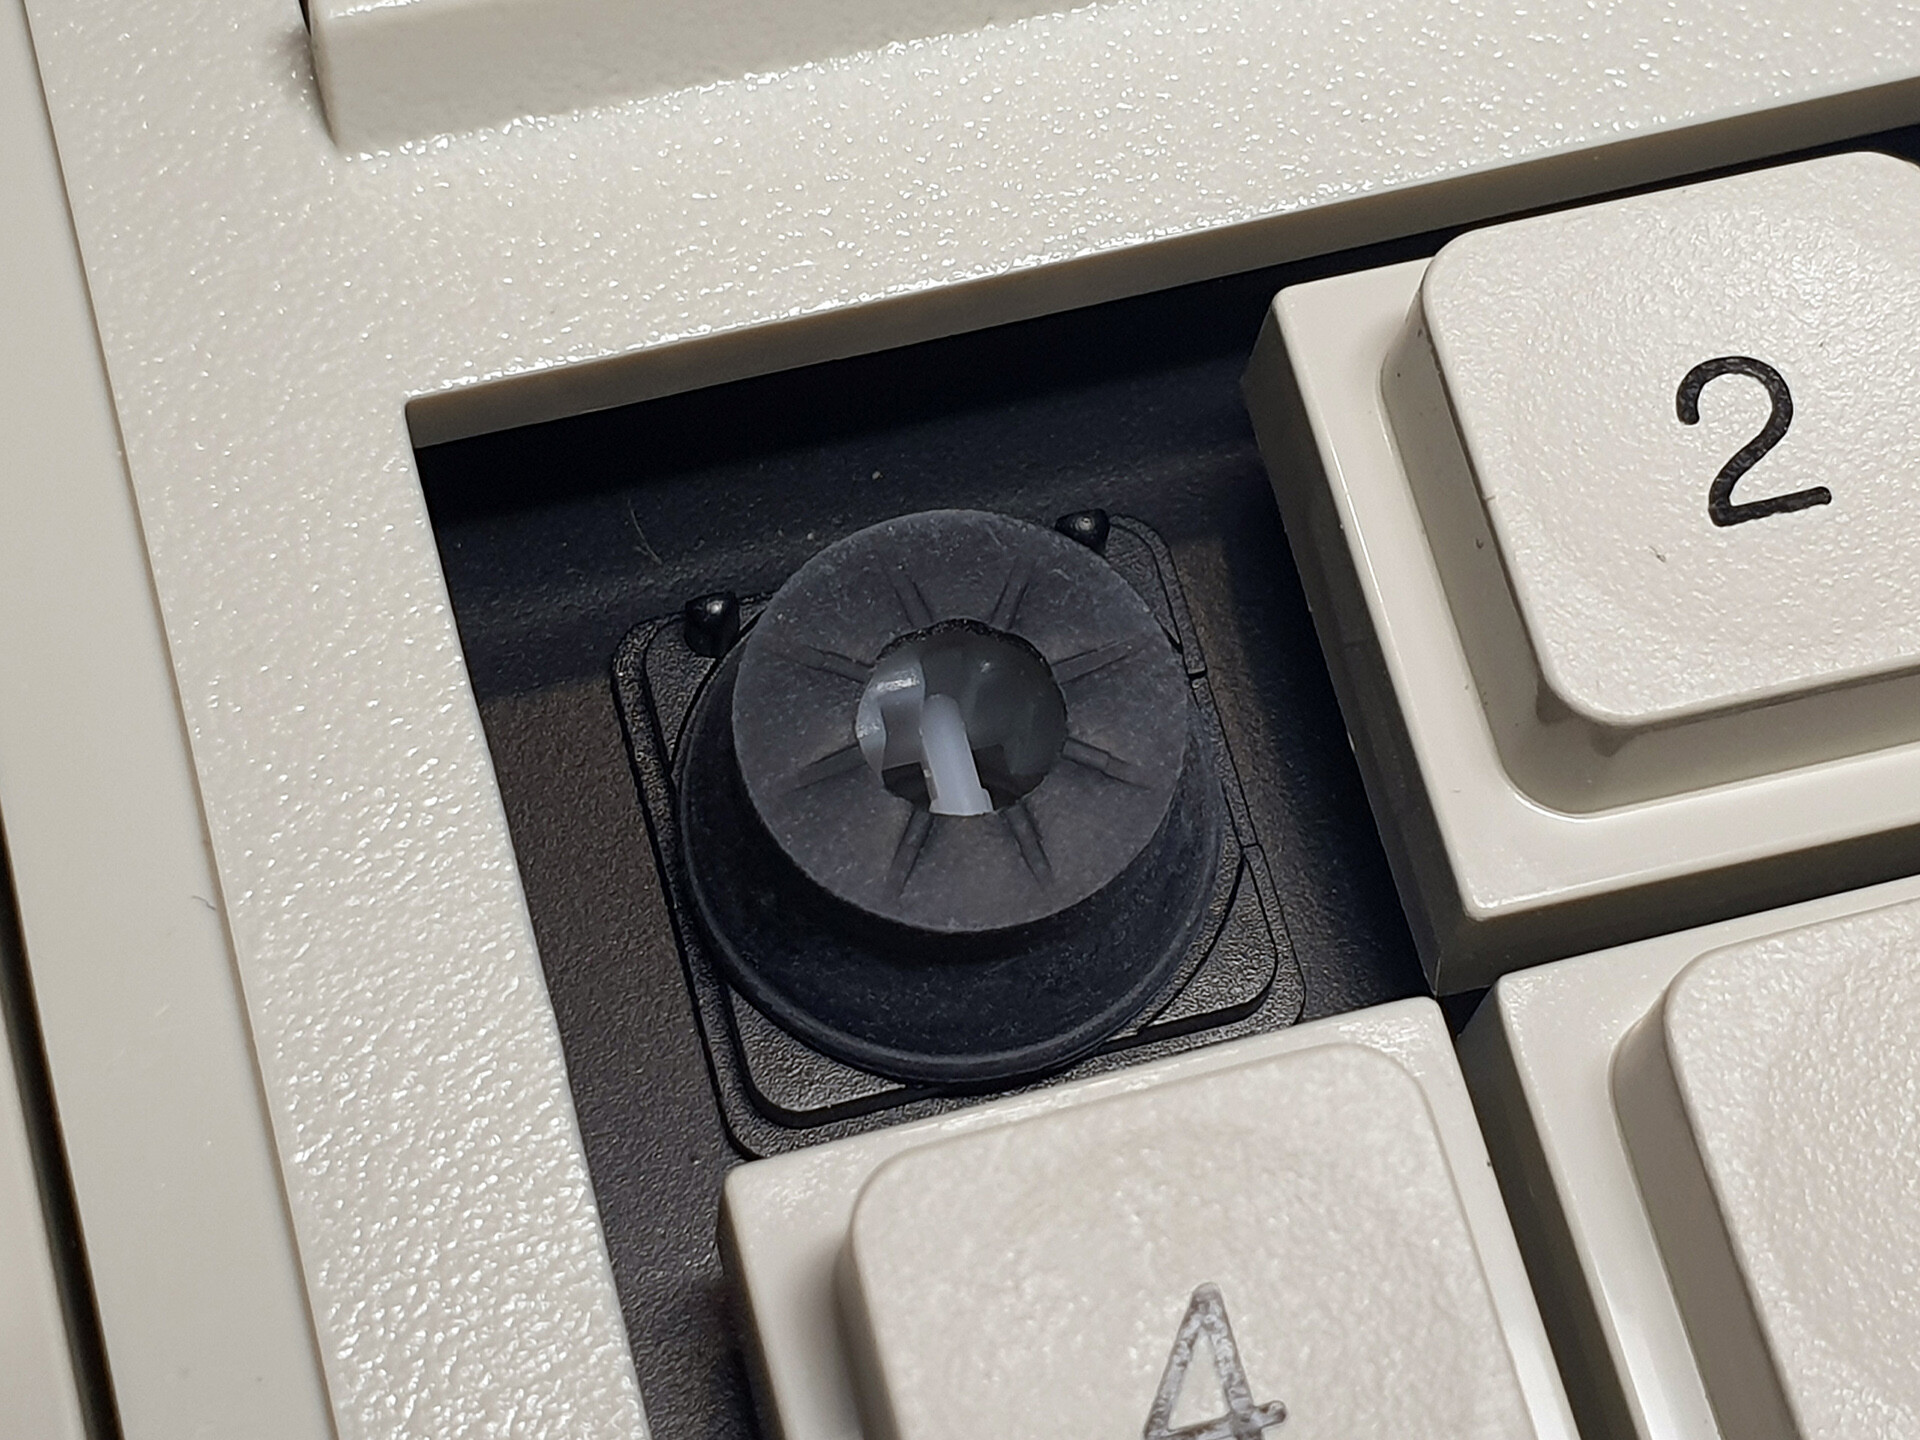 Cherry's new mechanical switch hails from '80s terminal keyboards